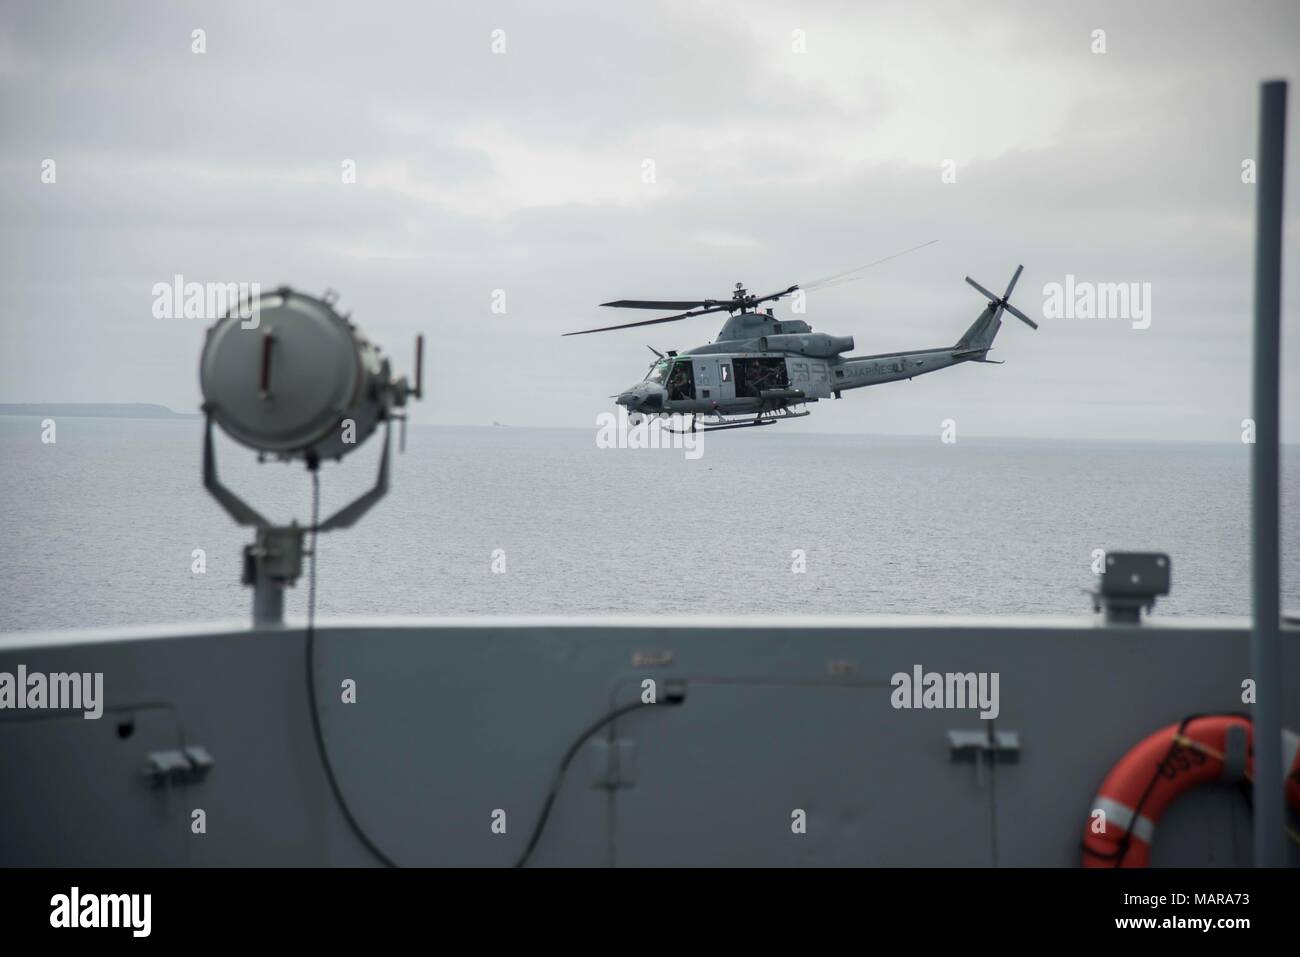 180331-N-YJ378-0106 PACIFIC OCEAN (March 31, 2018) A UH-1Y Venom helicopter attached to the Marine Light Attack Helicopter detachment of Marine Medium Tiltrotor Squadron 166, flies by San Antonio-class amphibious transport dock USS Anchorage (LPD 23), during an amphibious squadron and 13th Marine Expeditionary Unit (MEU) integration (PMINT) exercise. PMINT is a training evolution between Essex Amphibious Ready Group and 13th MEU, which allows Sailors and Marines to train as a cohesive unit in preparation for their upcoming deployment. (U.S. Navy photo by Mass Communication Specialist 2nd Class Stock Photo